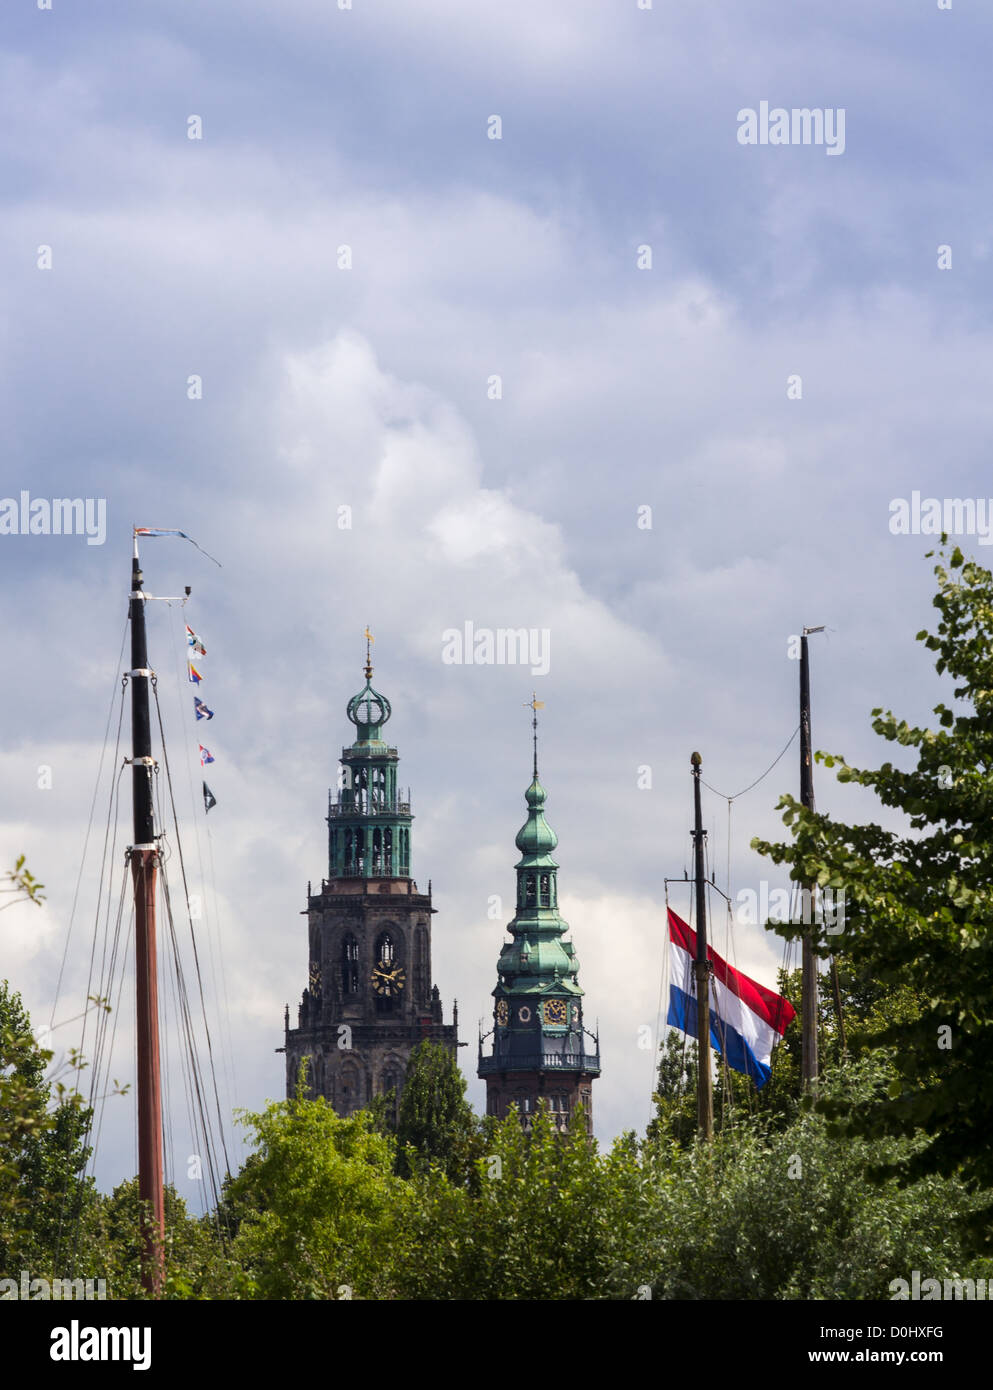 Dutch cityscape with church towers, boat masts and Dutch flag Stock Photo